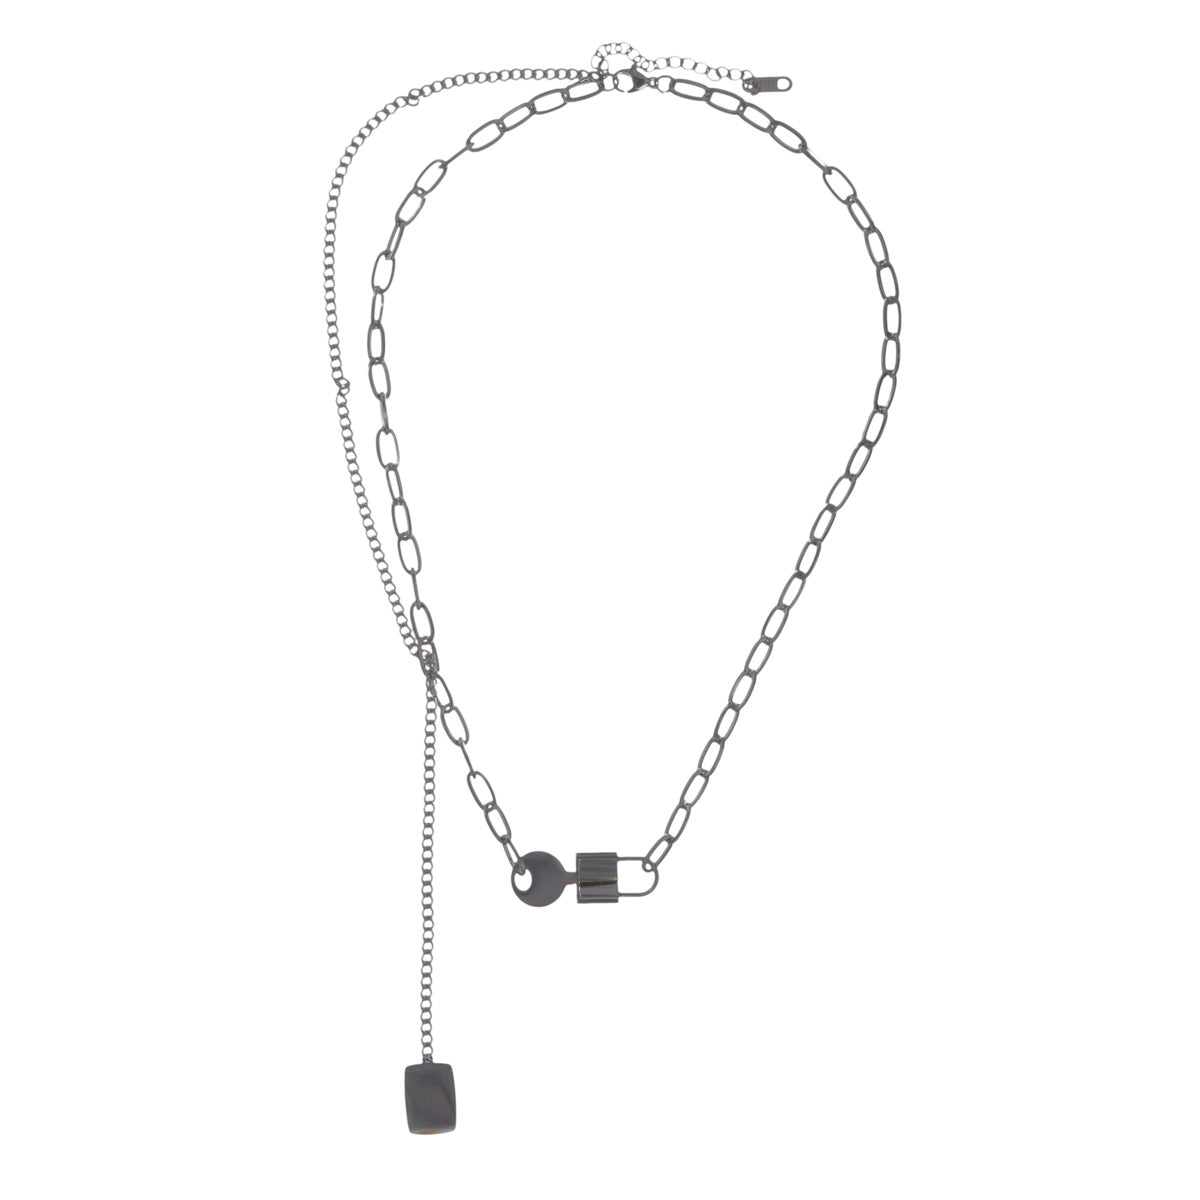 Cable chain necklace with 44cm +5cm (steel)